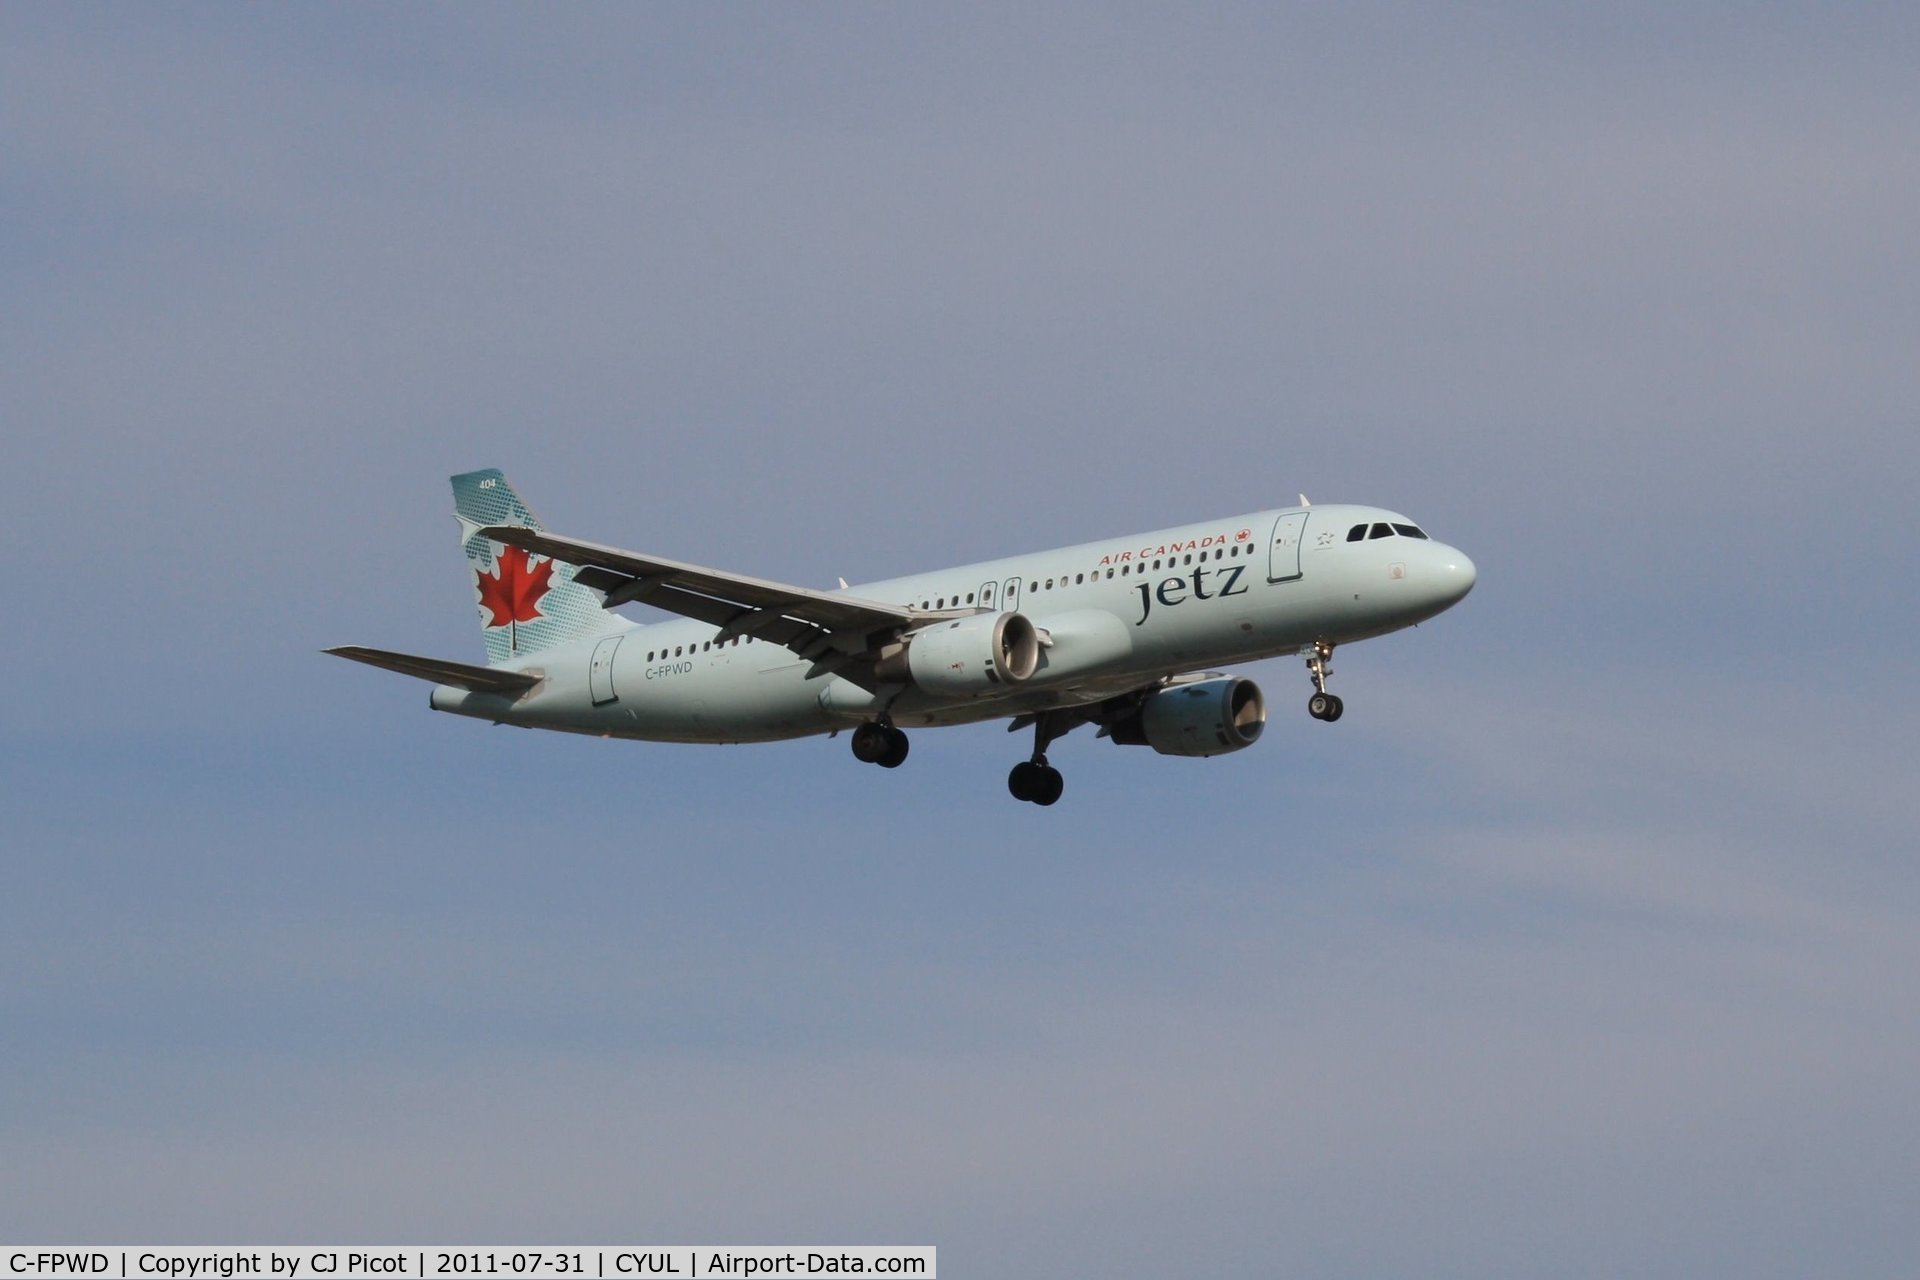 C-FPWD, 1991 Airbus A320-211 C/N 231, Arriving at Montréal-Trudeau on runway 24-R